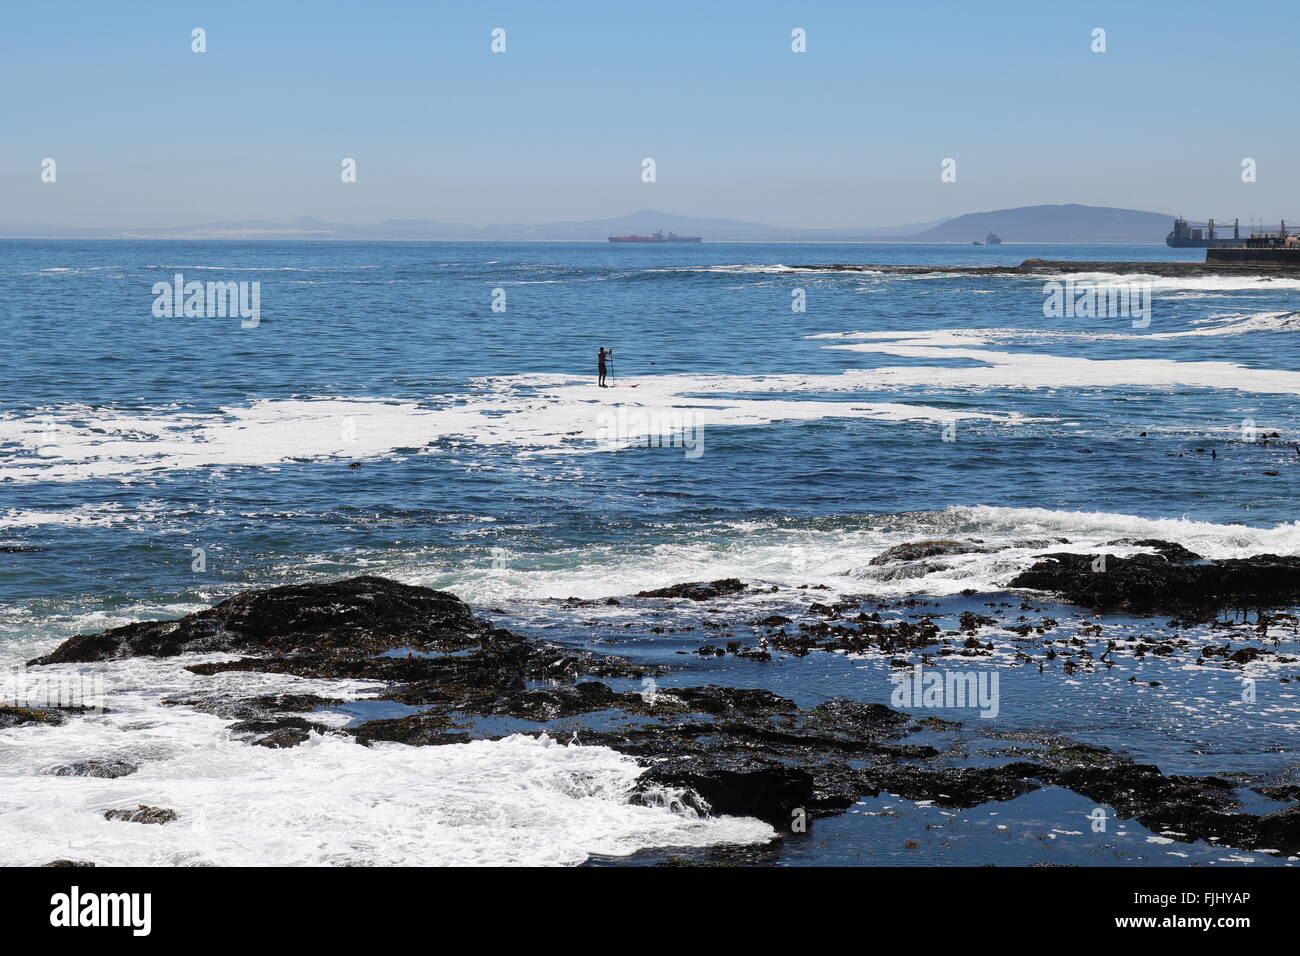 Stand up paddle boarder, Sea Point, Cape Town, South Africa Stock Photo